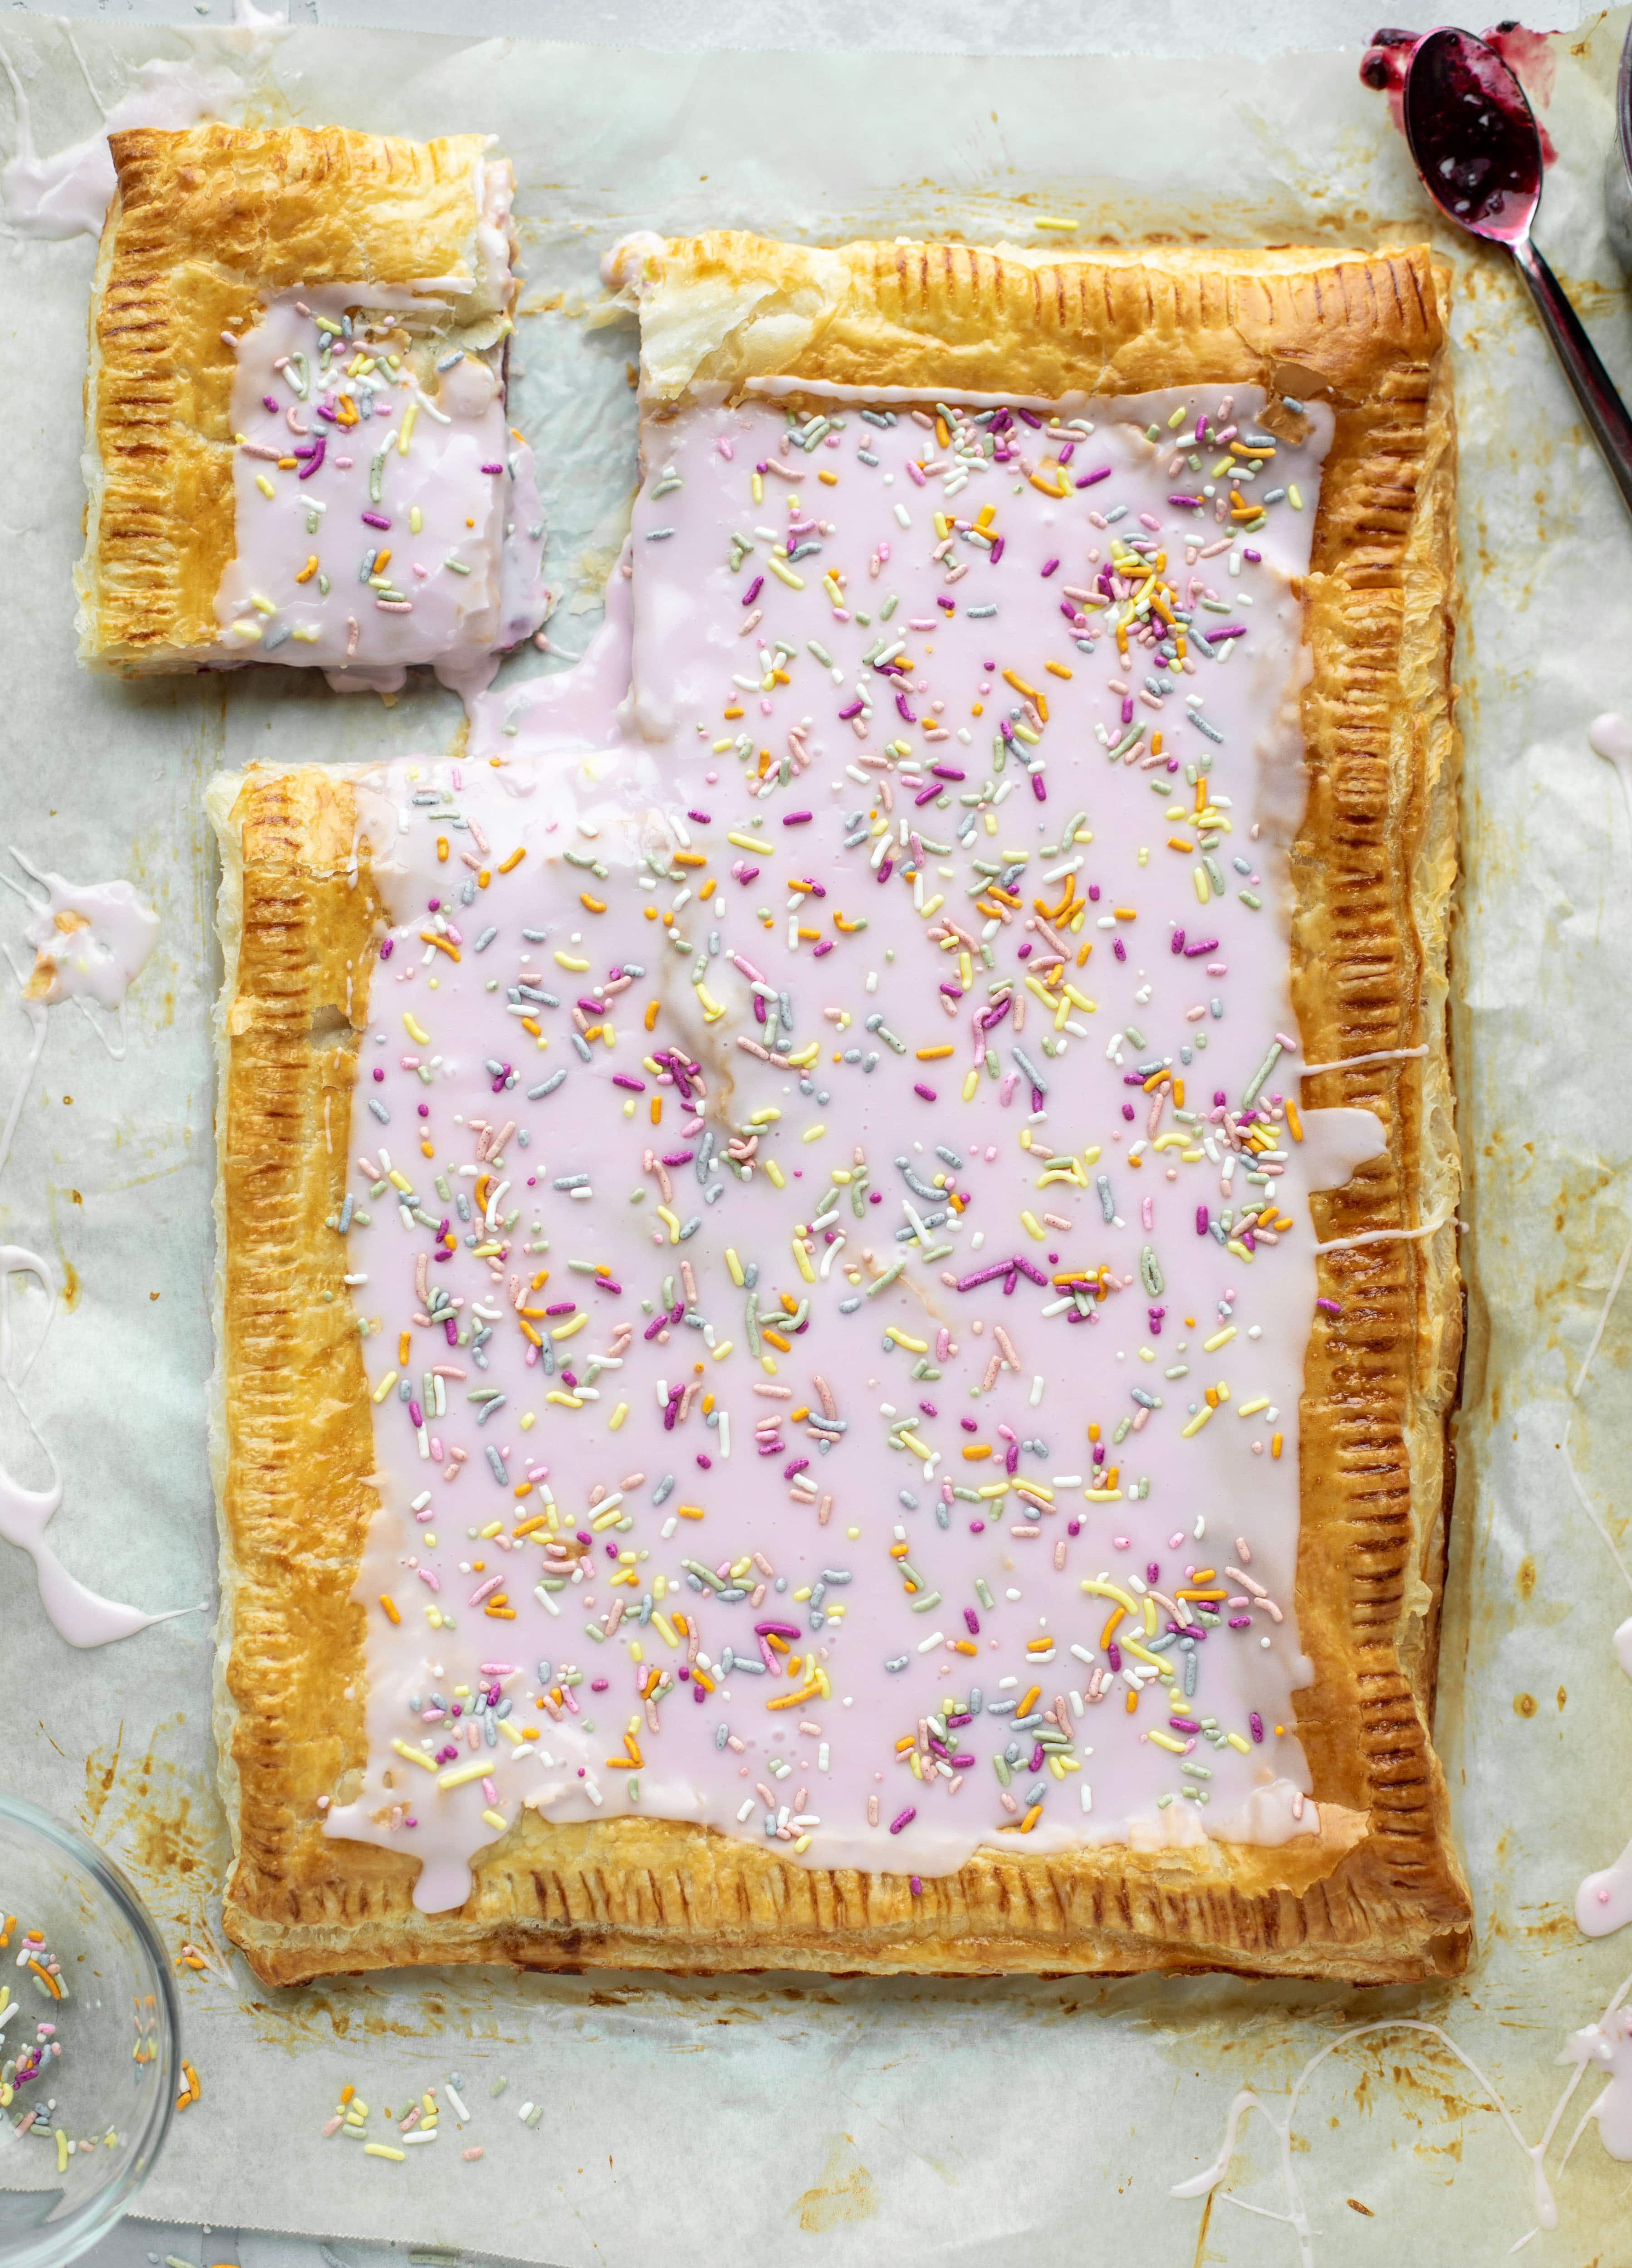 This giant pop tart recipe can be made exclusively with ingredients in your freezer! I love to make a berry lavender flavor - so perfect for spring! 